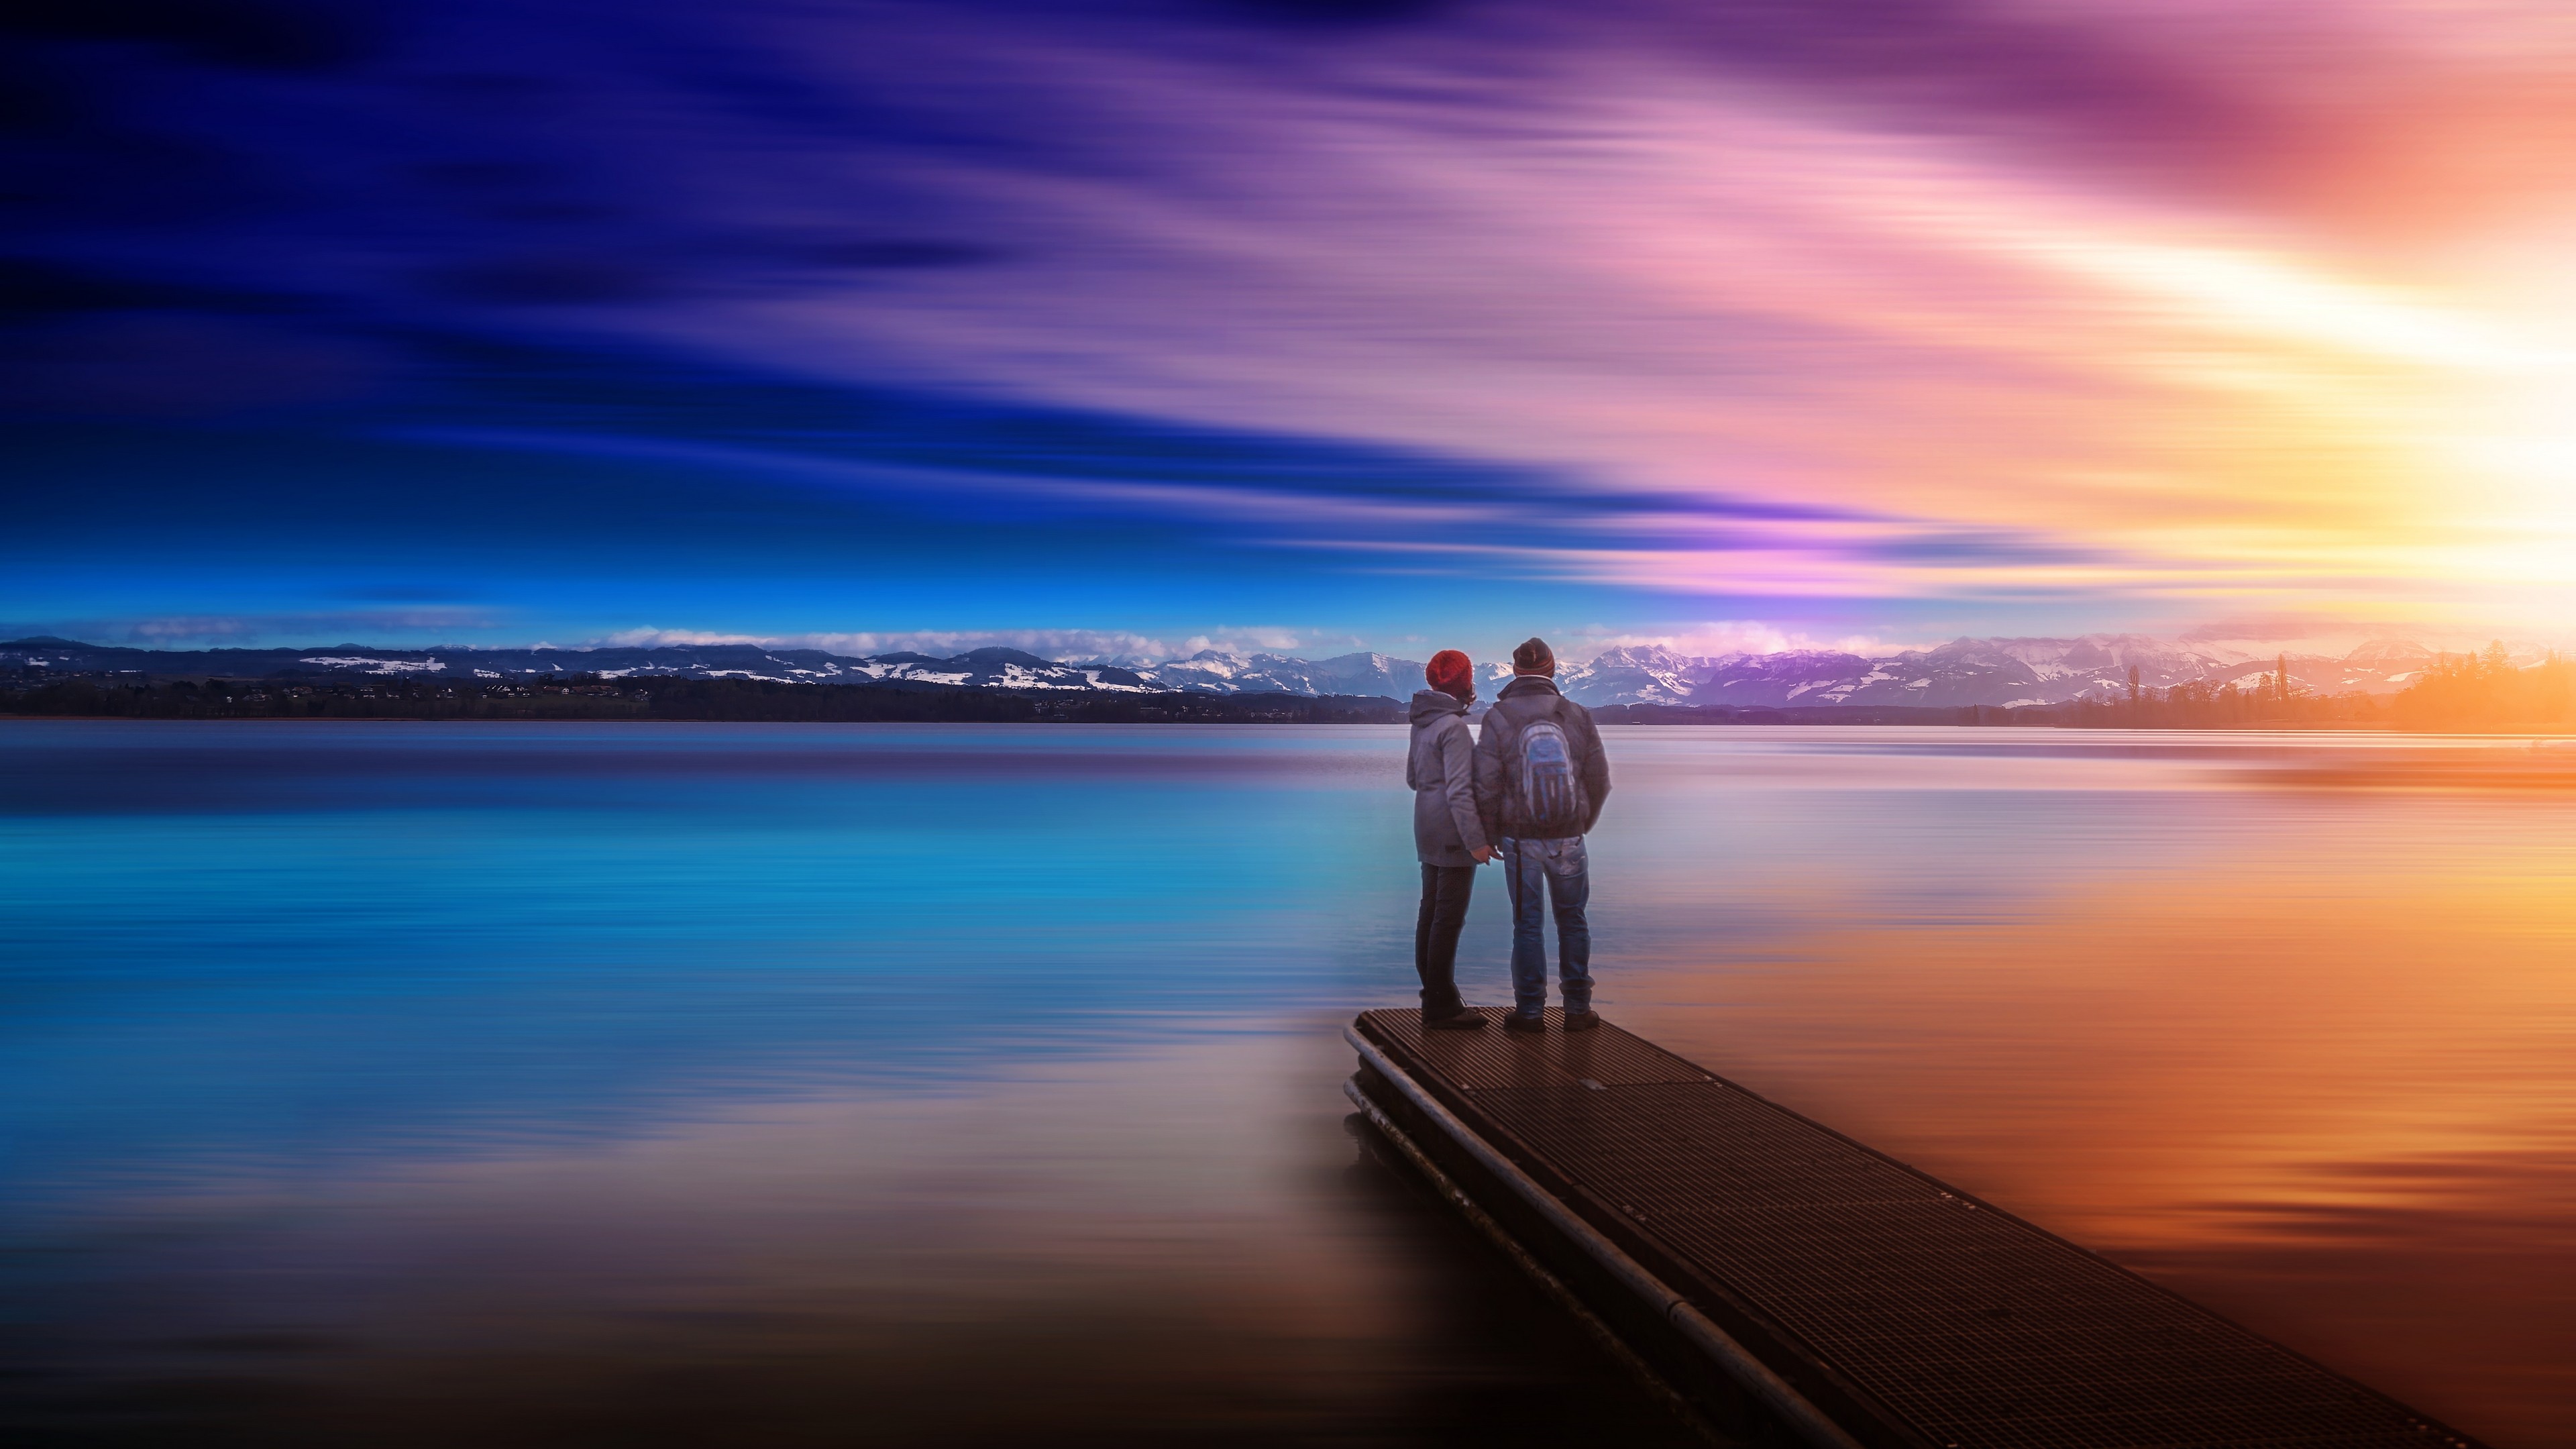 General 3840x2160 couple lake nature pier sky water sunlight outdoors women men men outdoors women outdoors calm waters